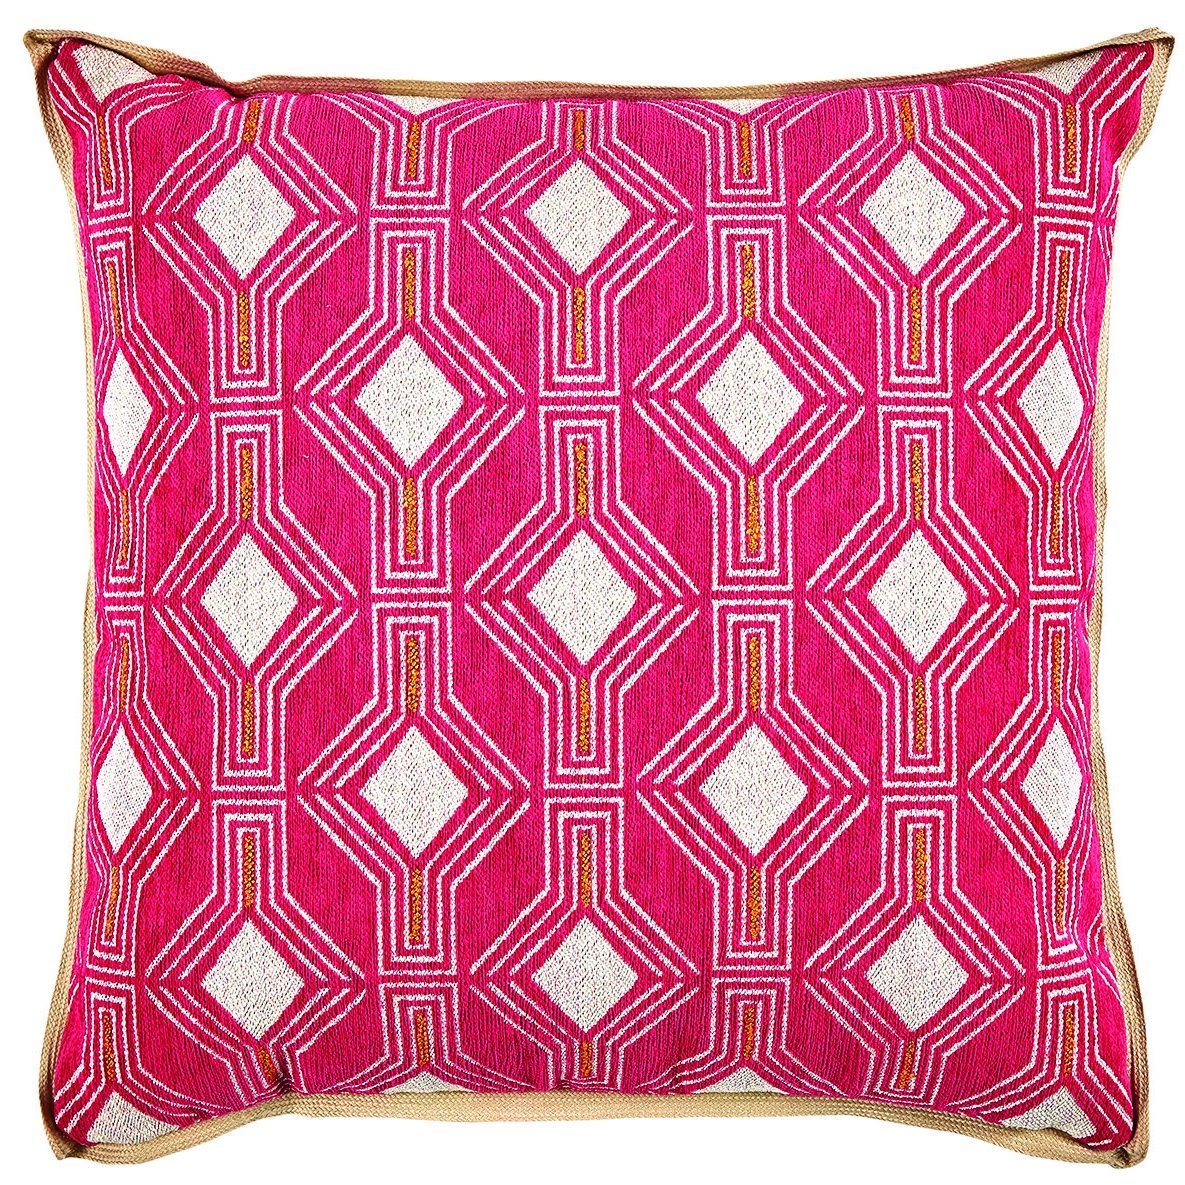 Lacefield Designs Modena Peony Pillow